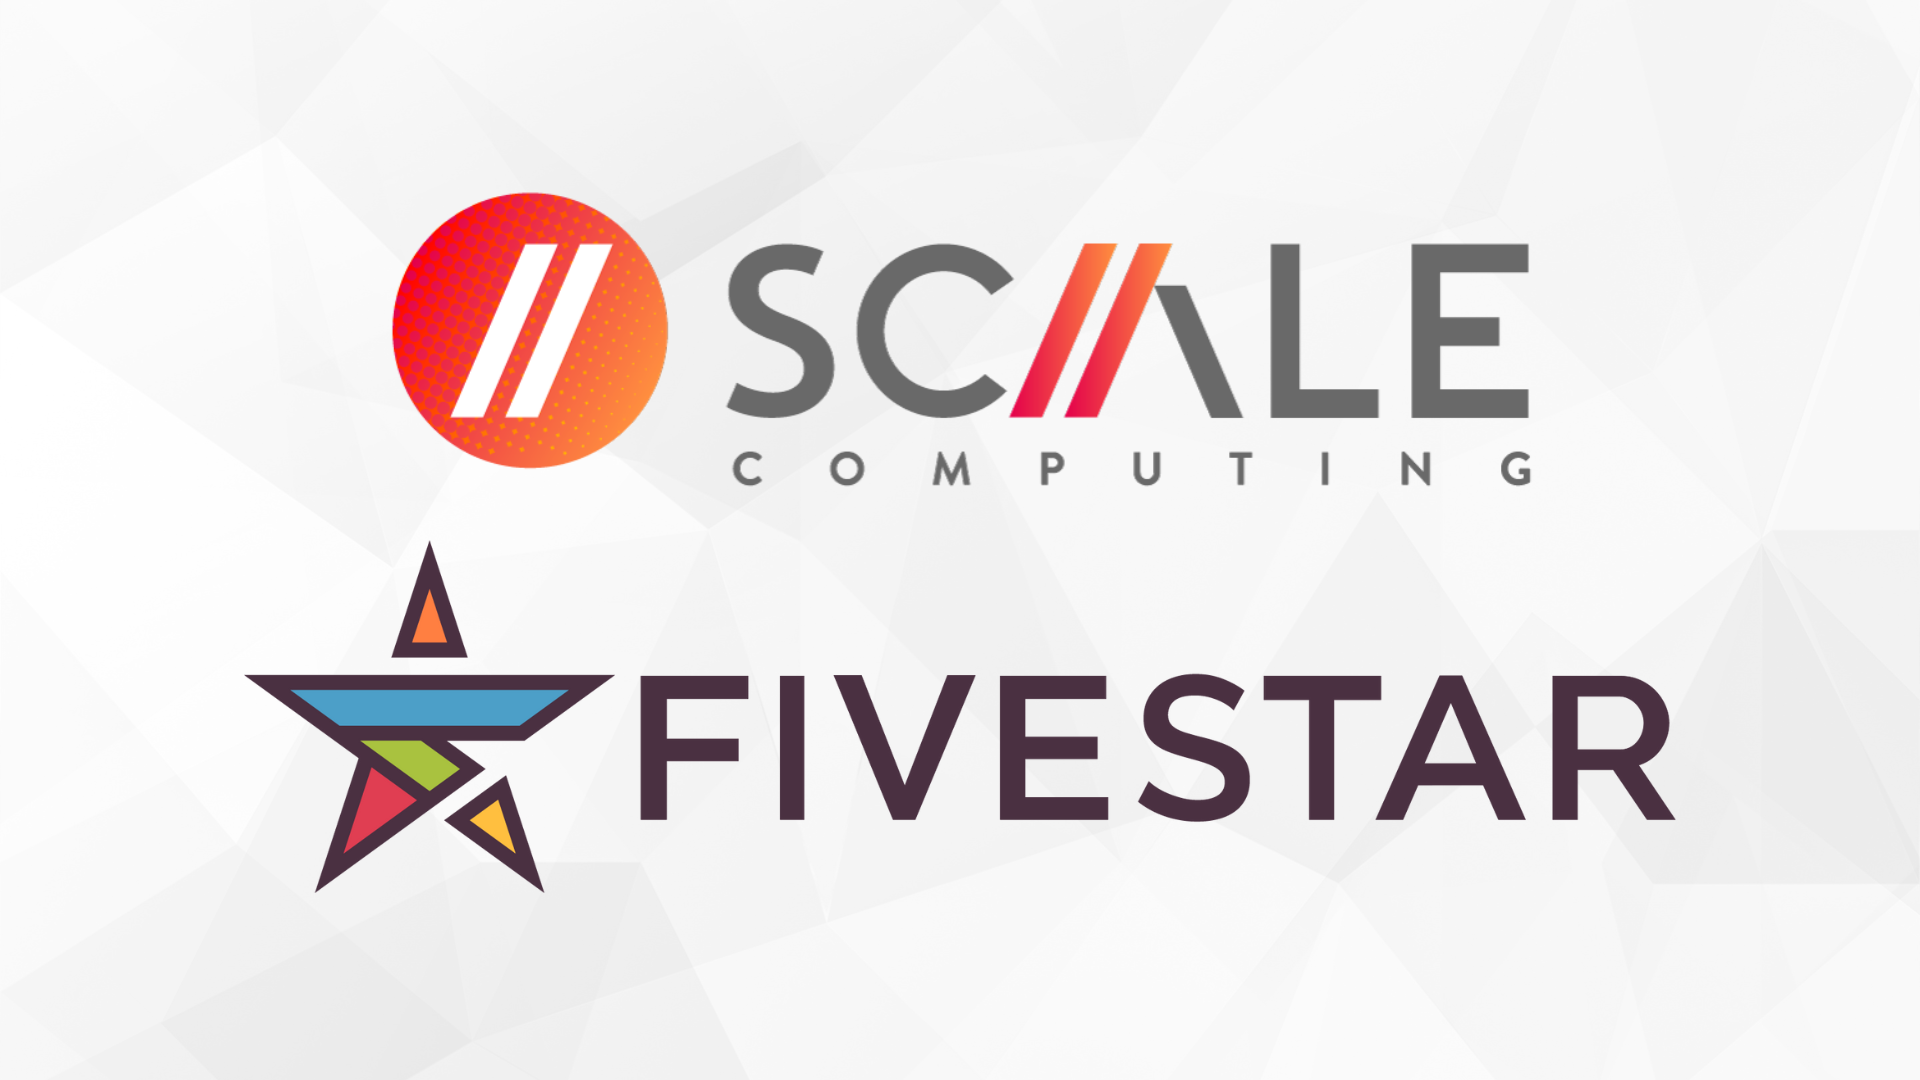 Scale Computing and Five Star Technology Solutions logos